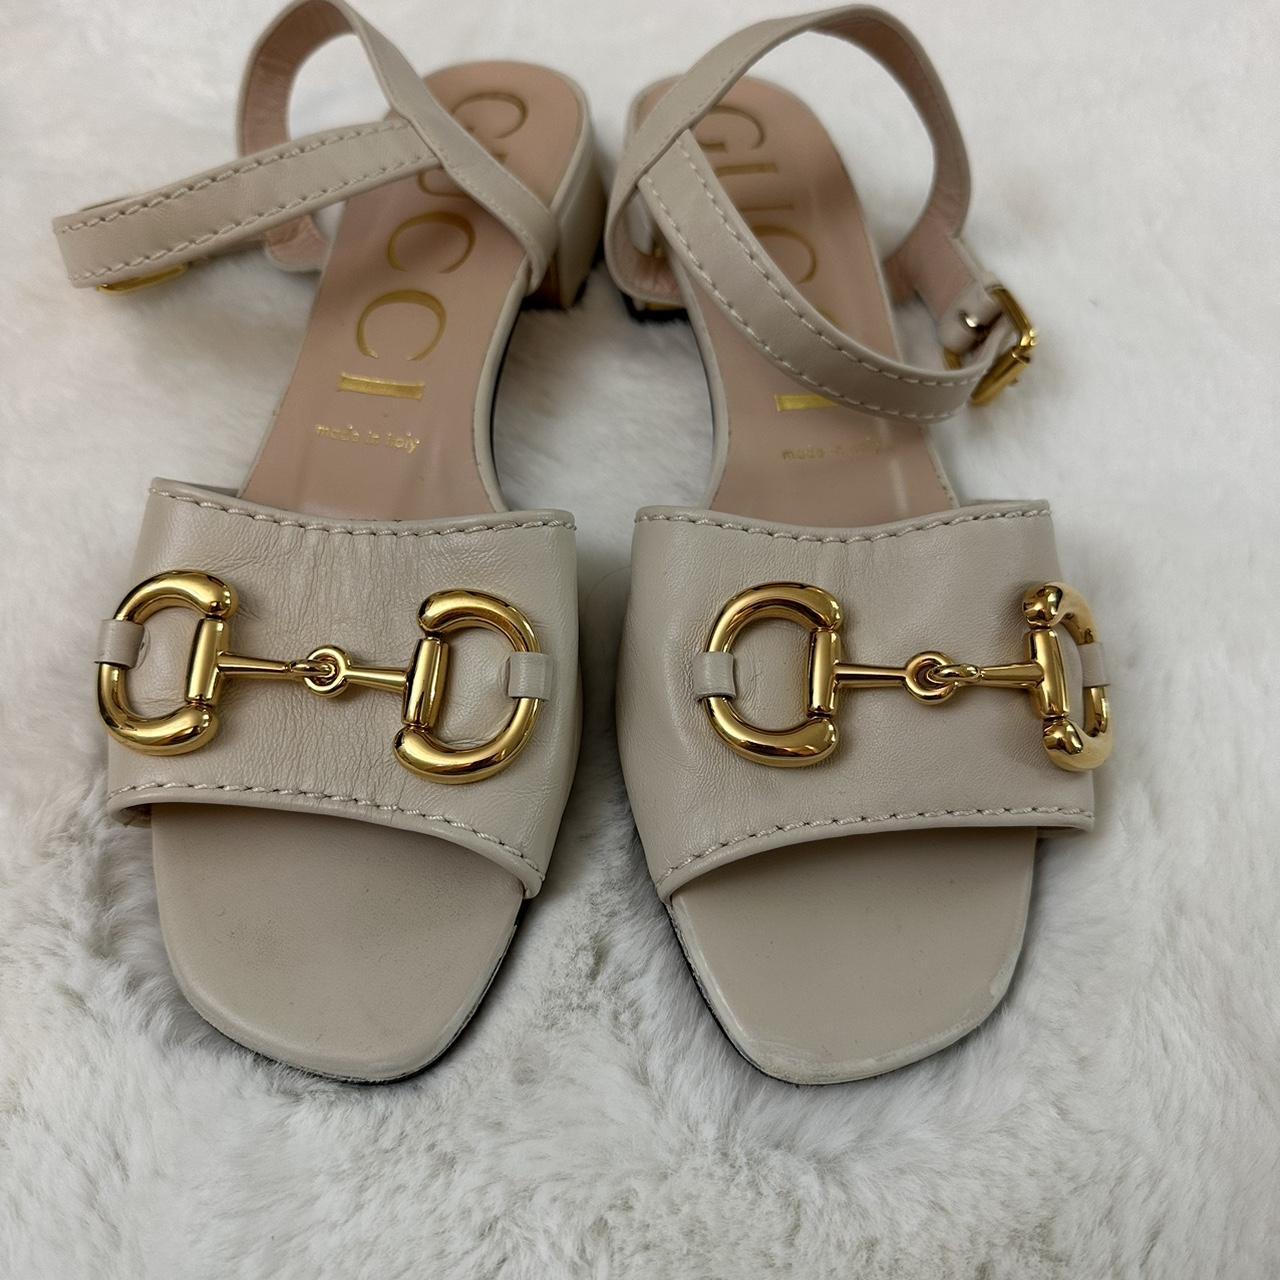 Ivory Gucci sandals - good condition- size 38 comes... - Depop